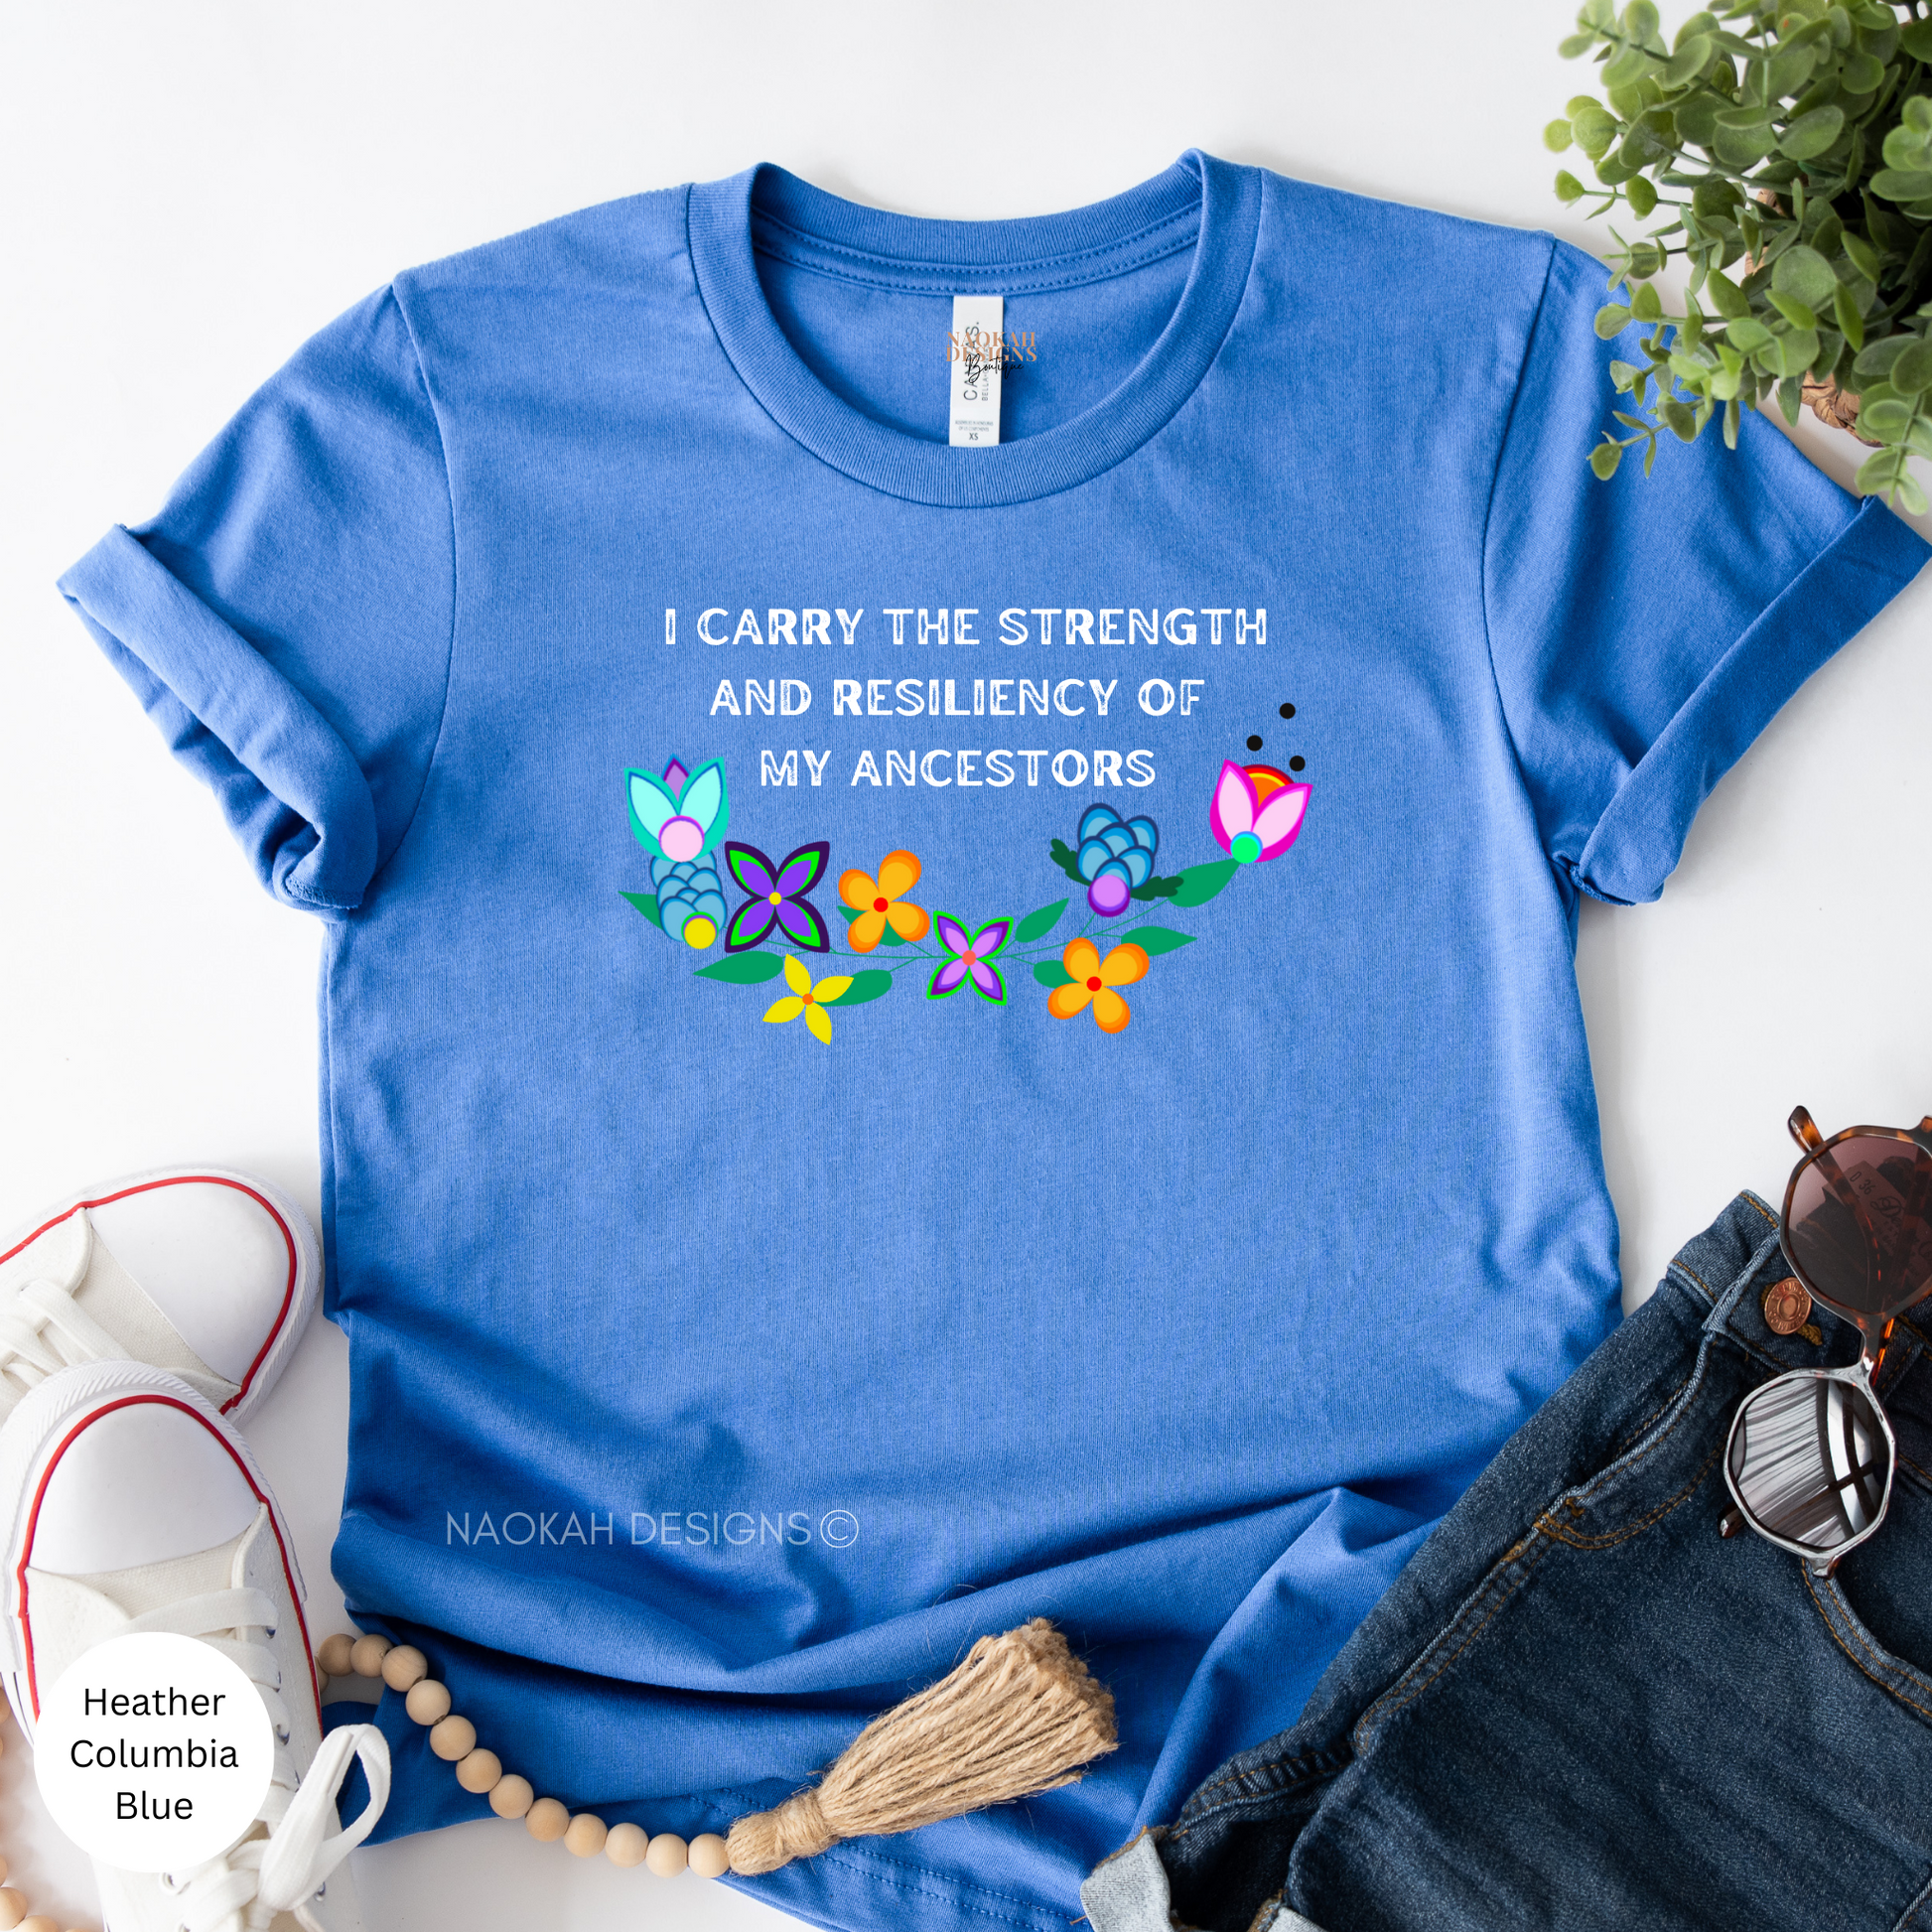 I Carry The Strength And Resiliency of My Ancestors Shirt, Indigenous Floral Shirt, Ancestors Shirt, Making Ancestors Proud Shirt